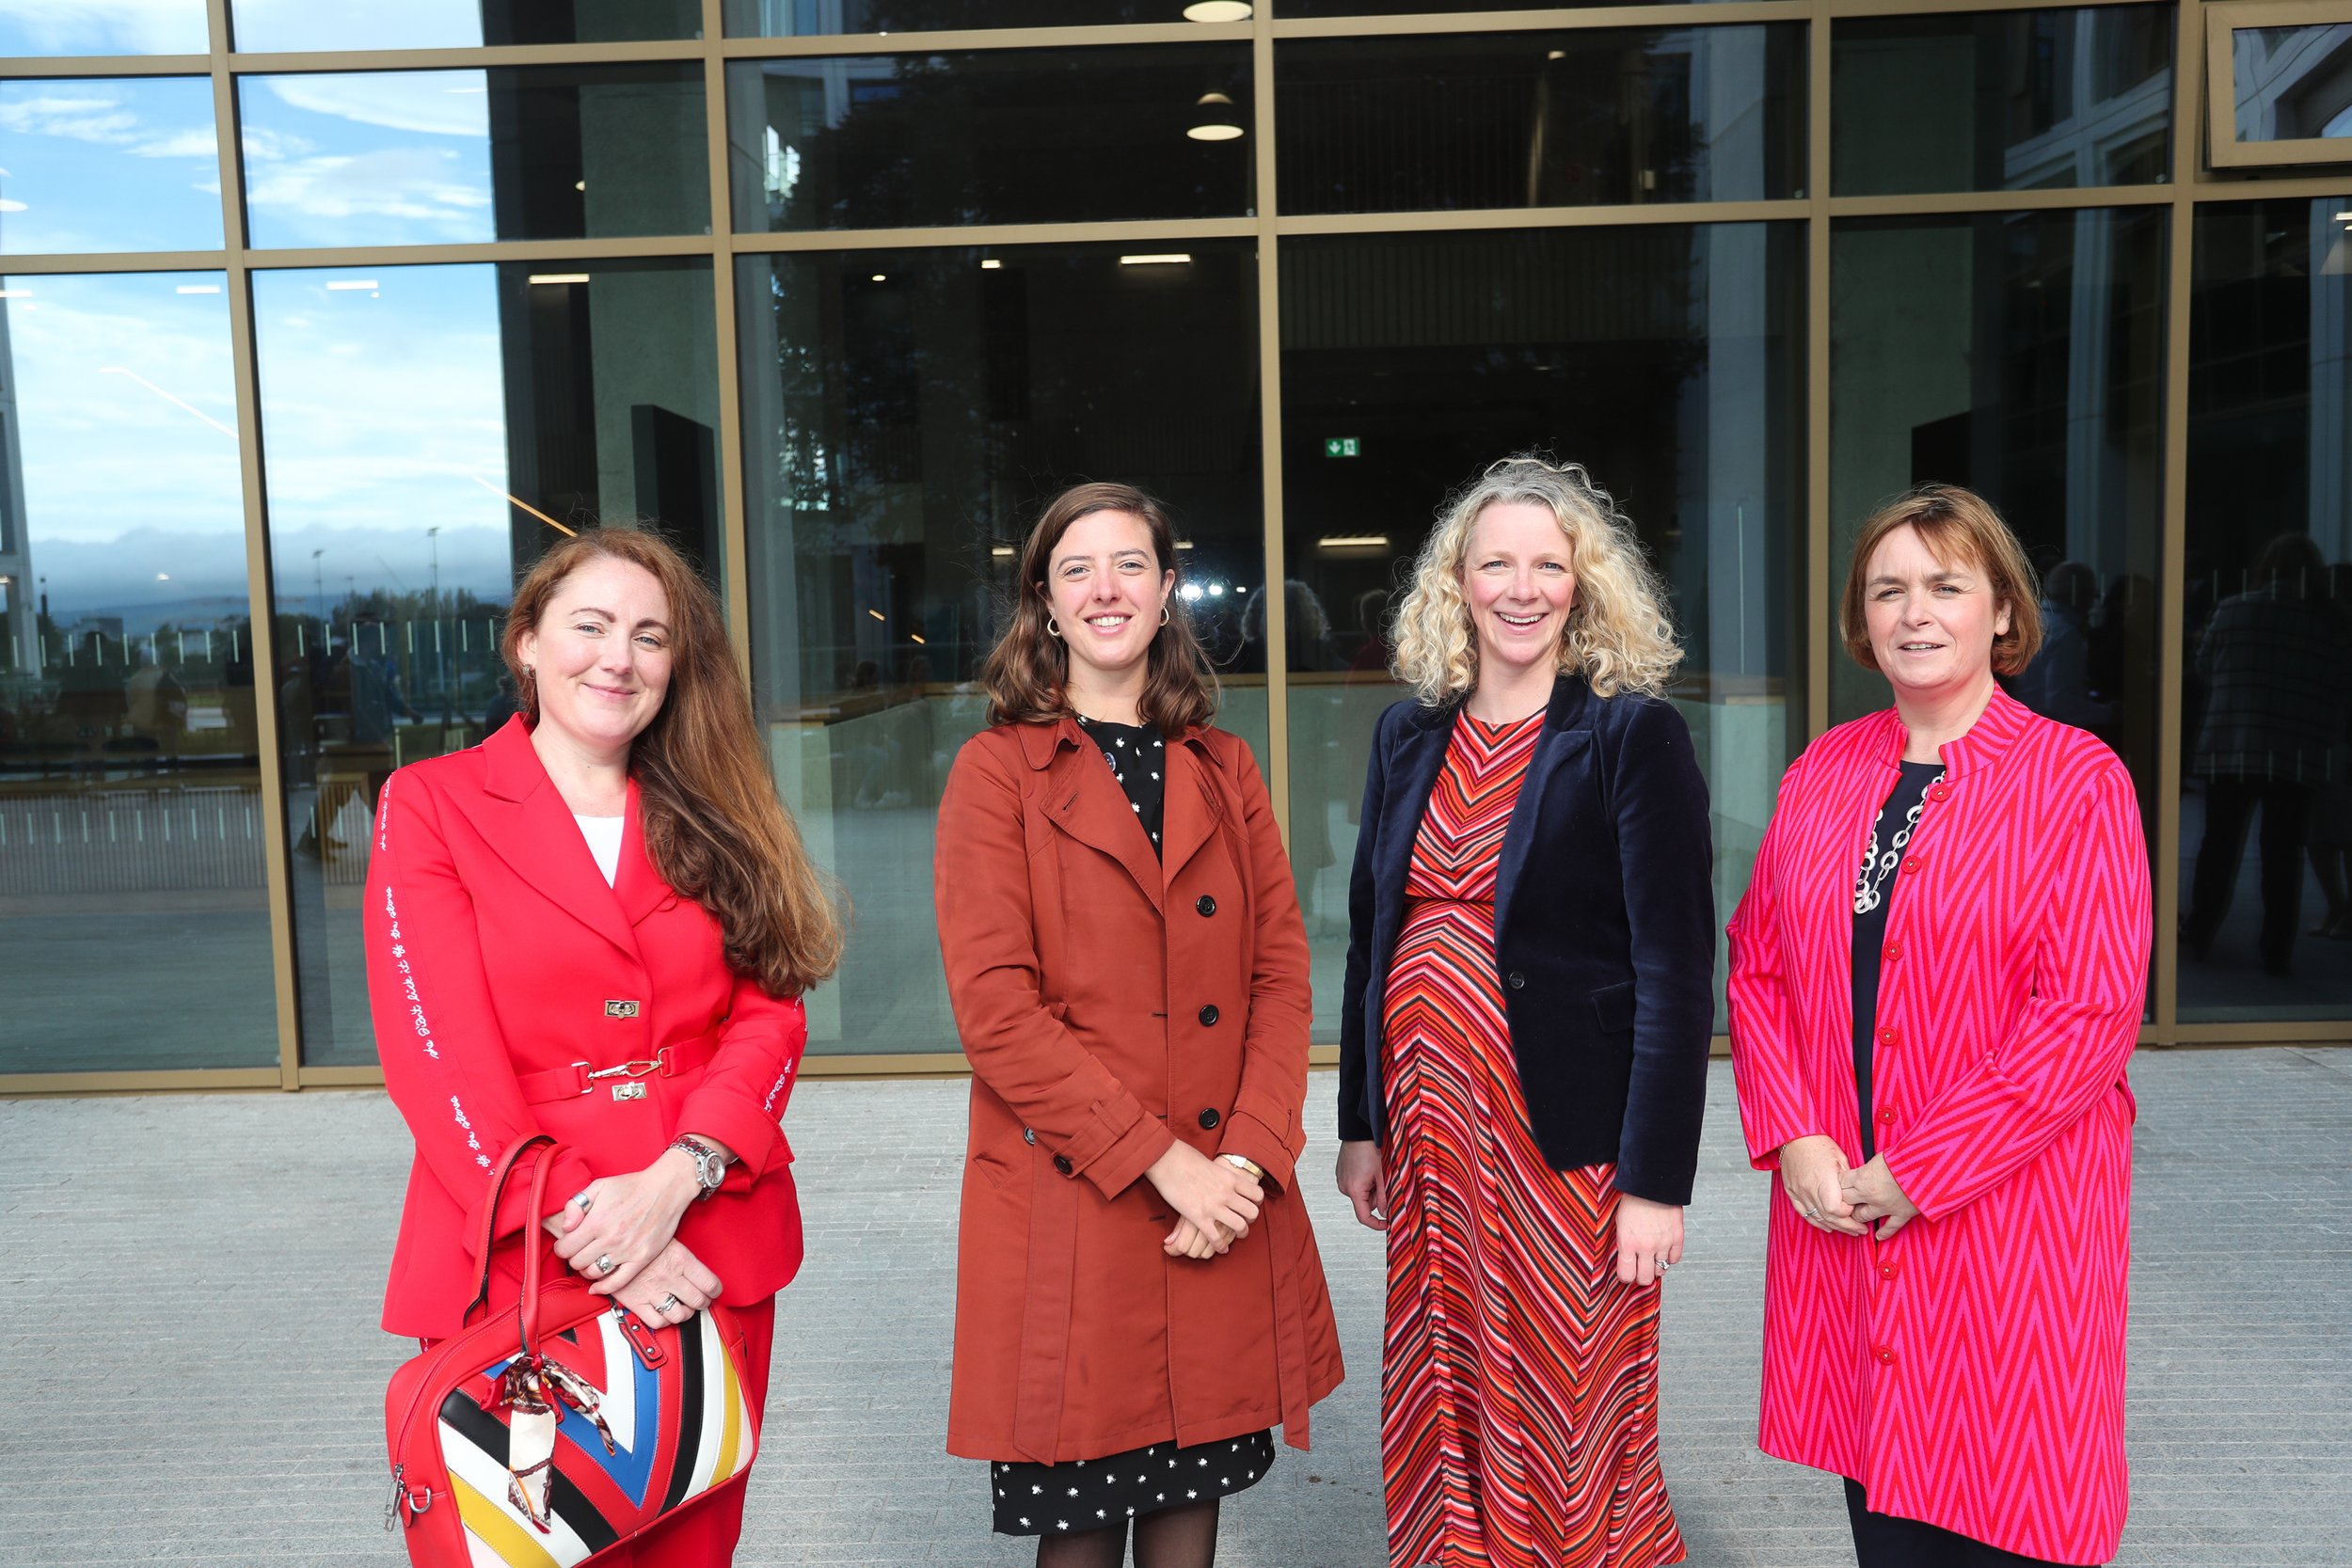  Sorcha Carthy, Senior Manager for HCI Pillar 3, Higher Education Authority, Nora Trench Bowles, Head of Lifelong Learning, Skills and Quality, Irish Universities Association, Claire McGee, Head of Education and Innovation Policy, IBEC, and Vivienne 